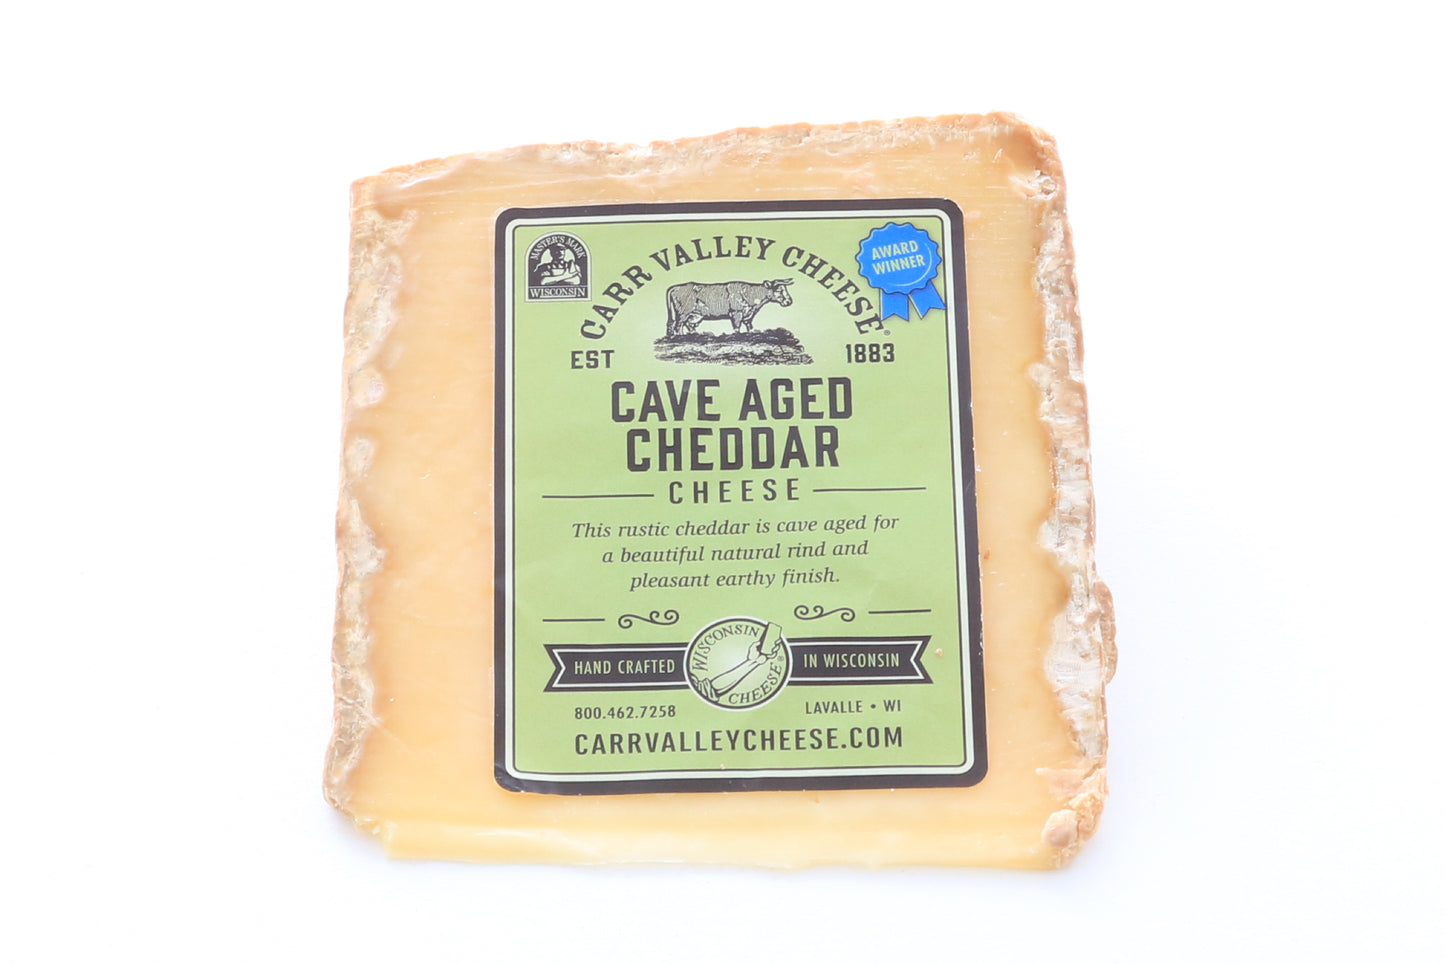 8 ounce piece of cave aged white cheddar